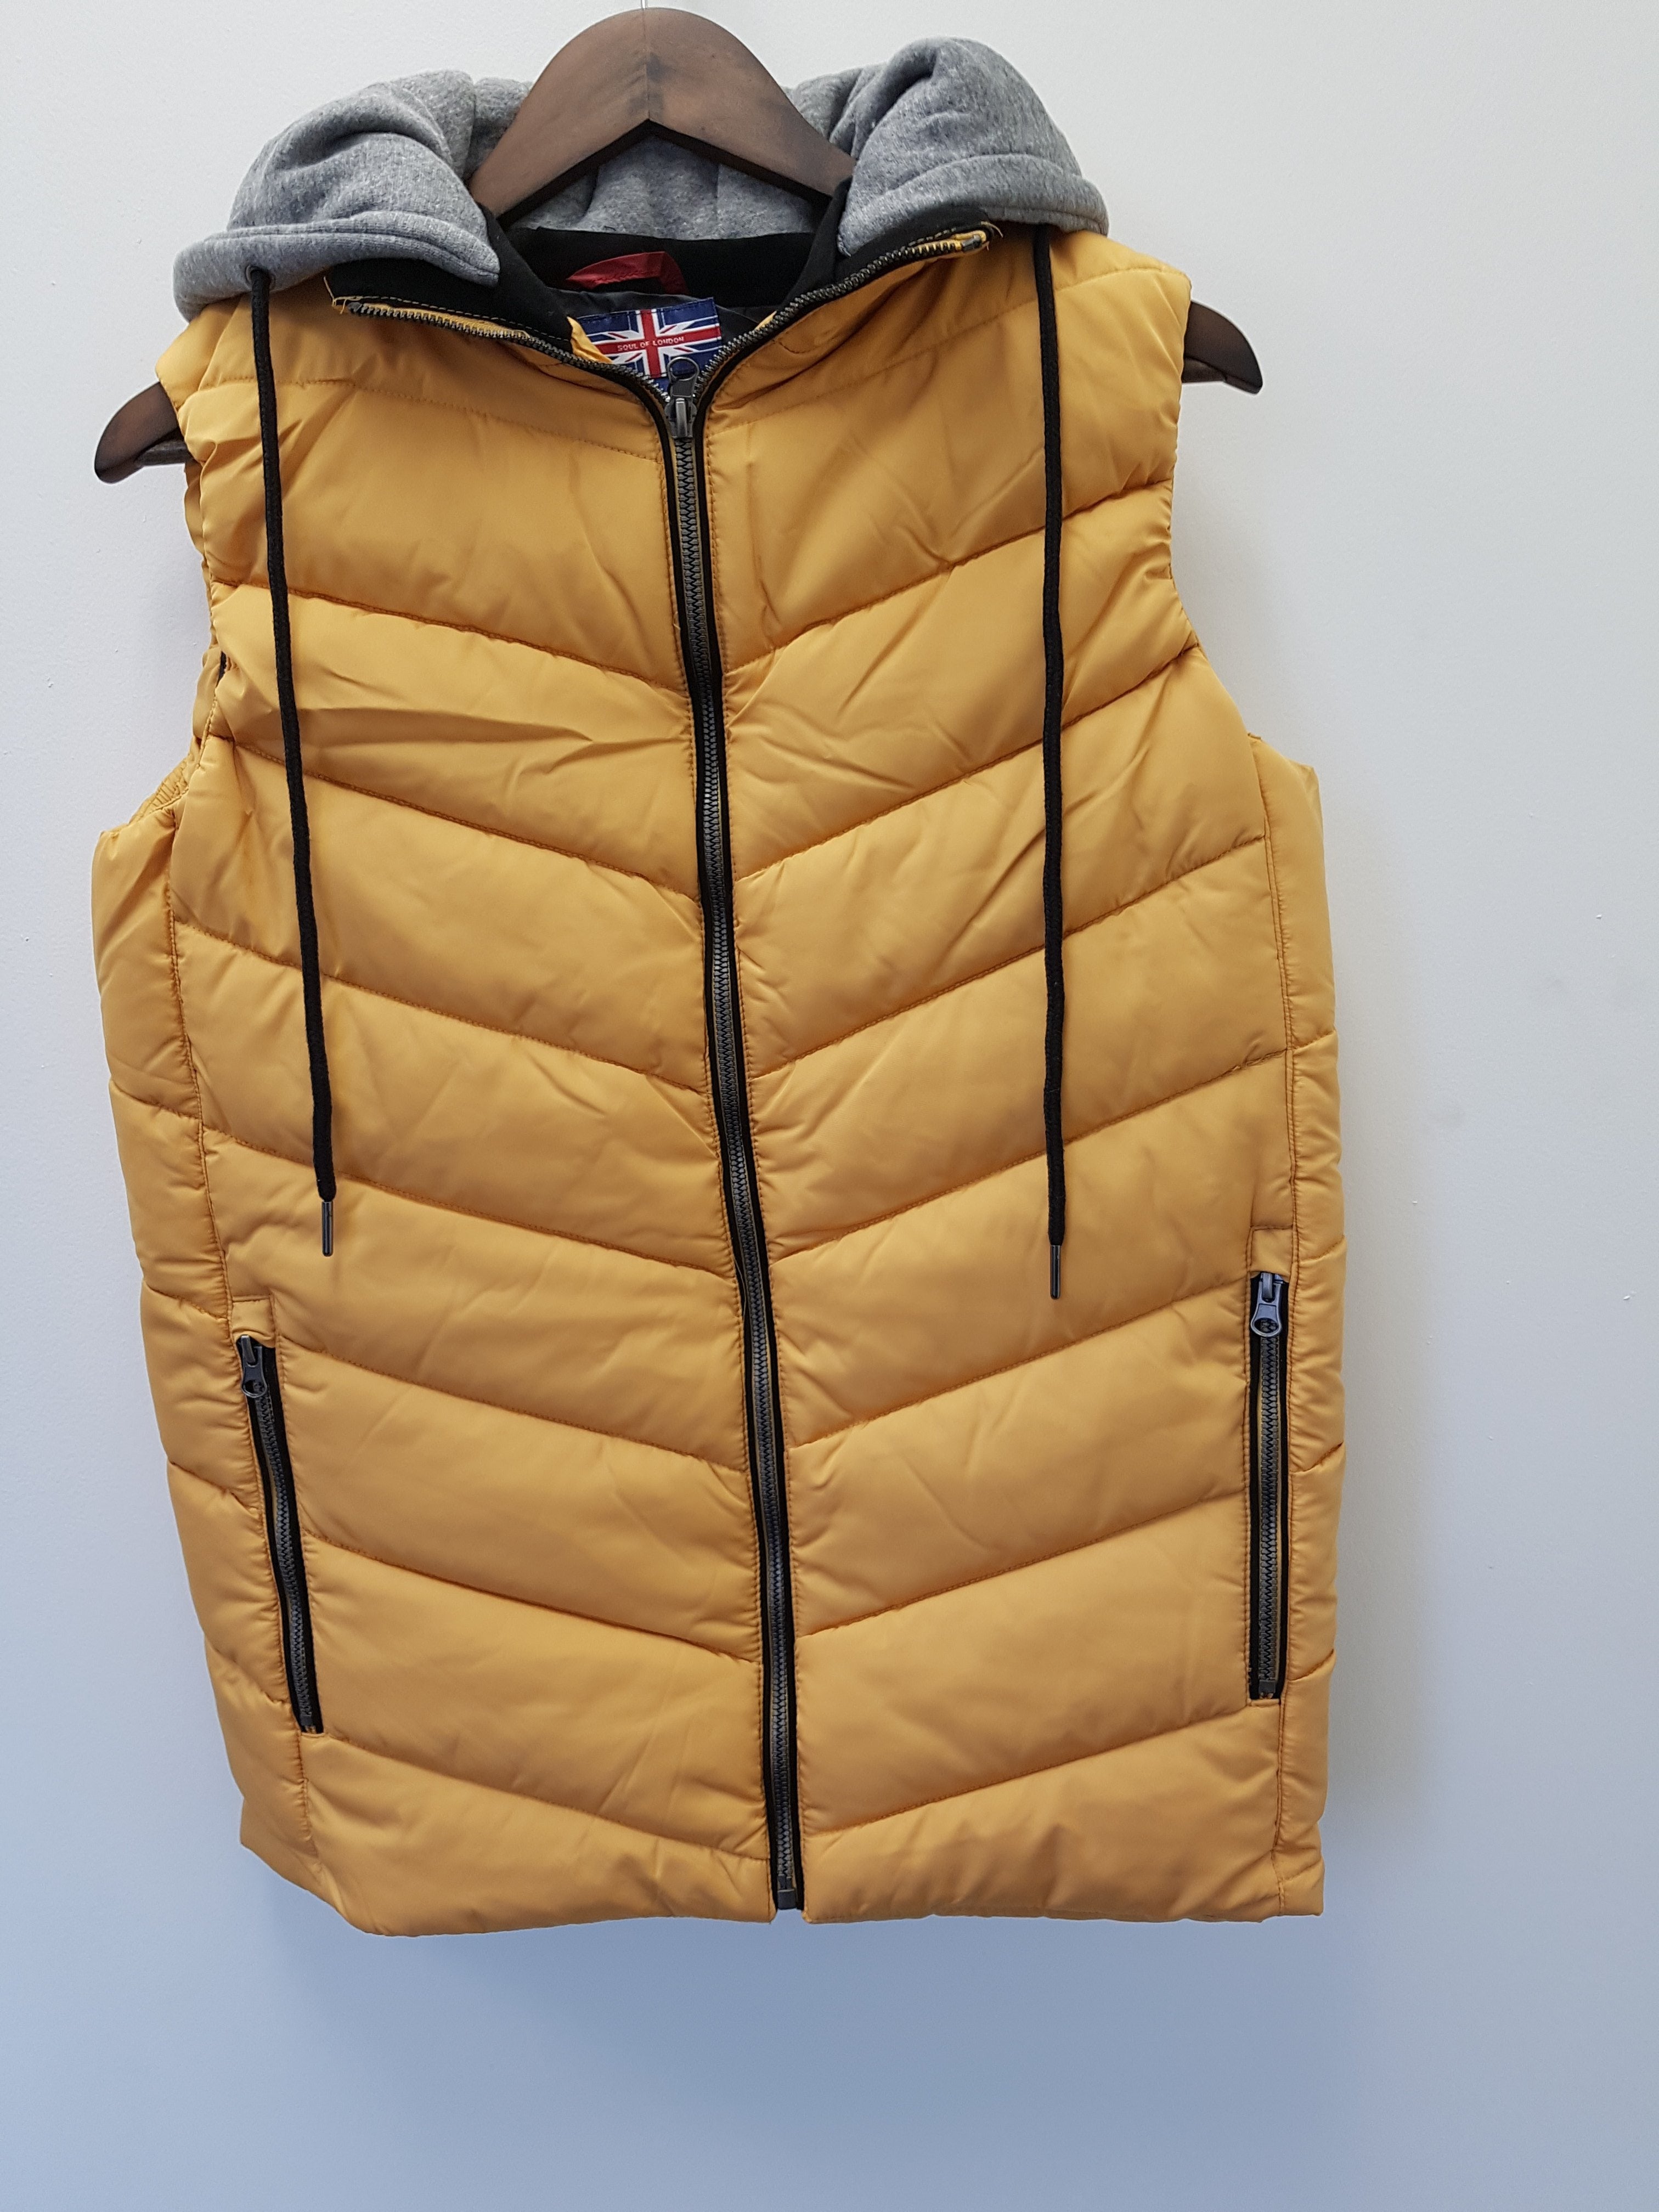 Sleeveless Quilted Pattern Vest Sport Jacket